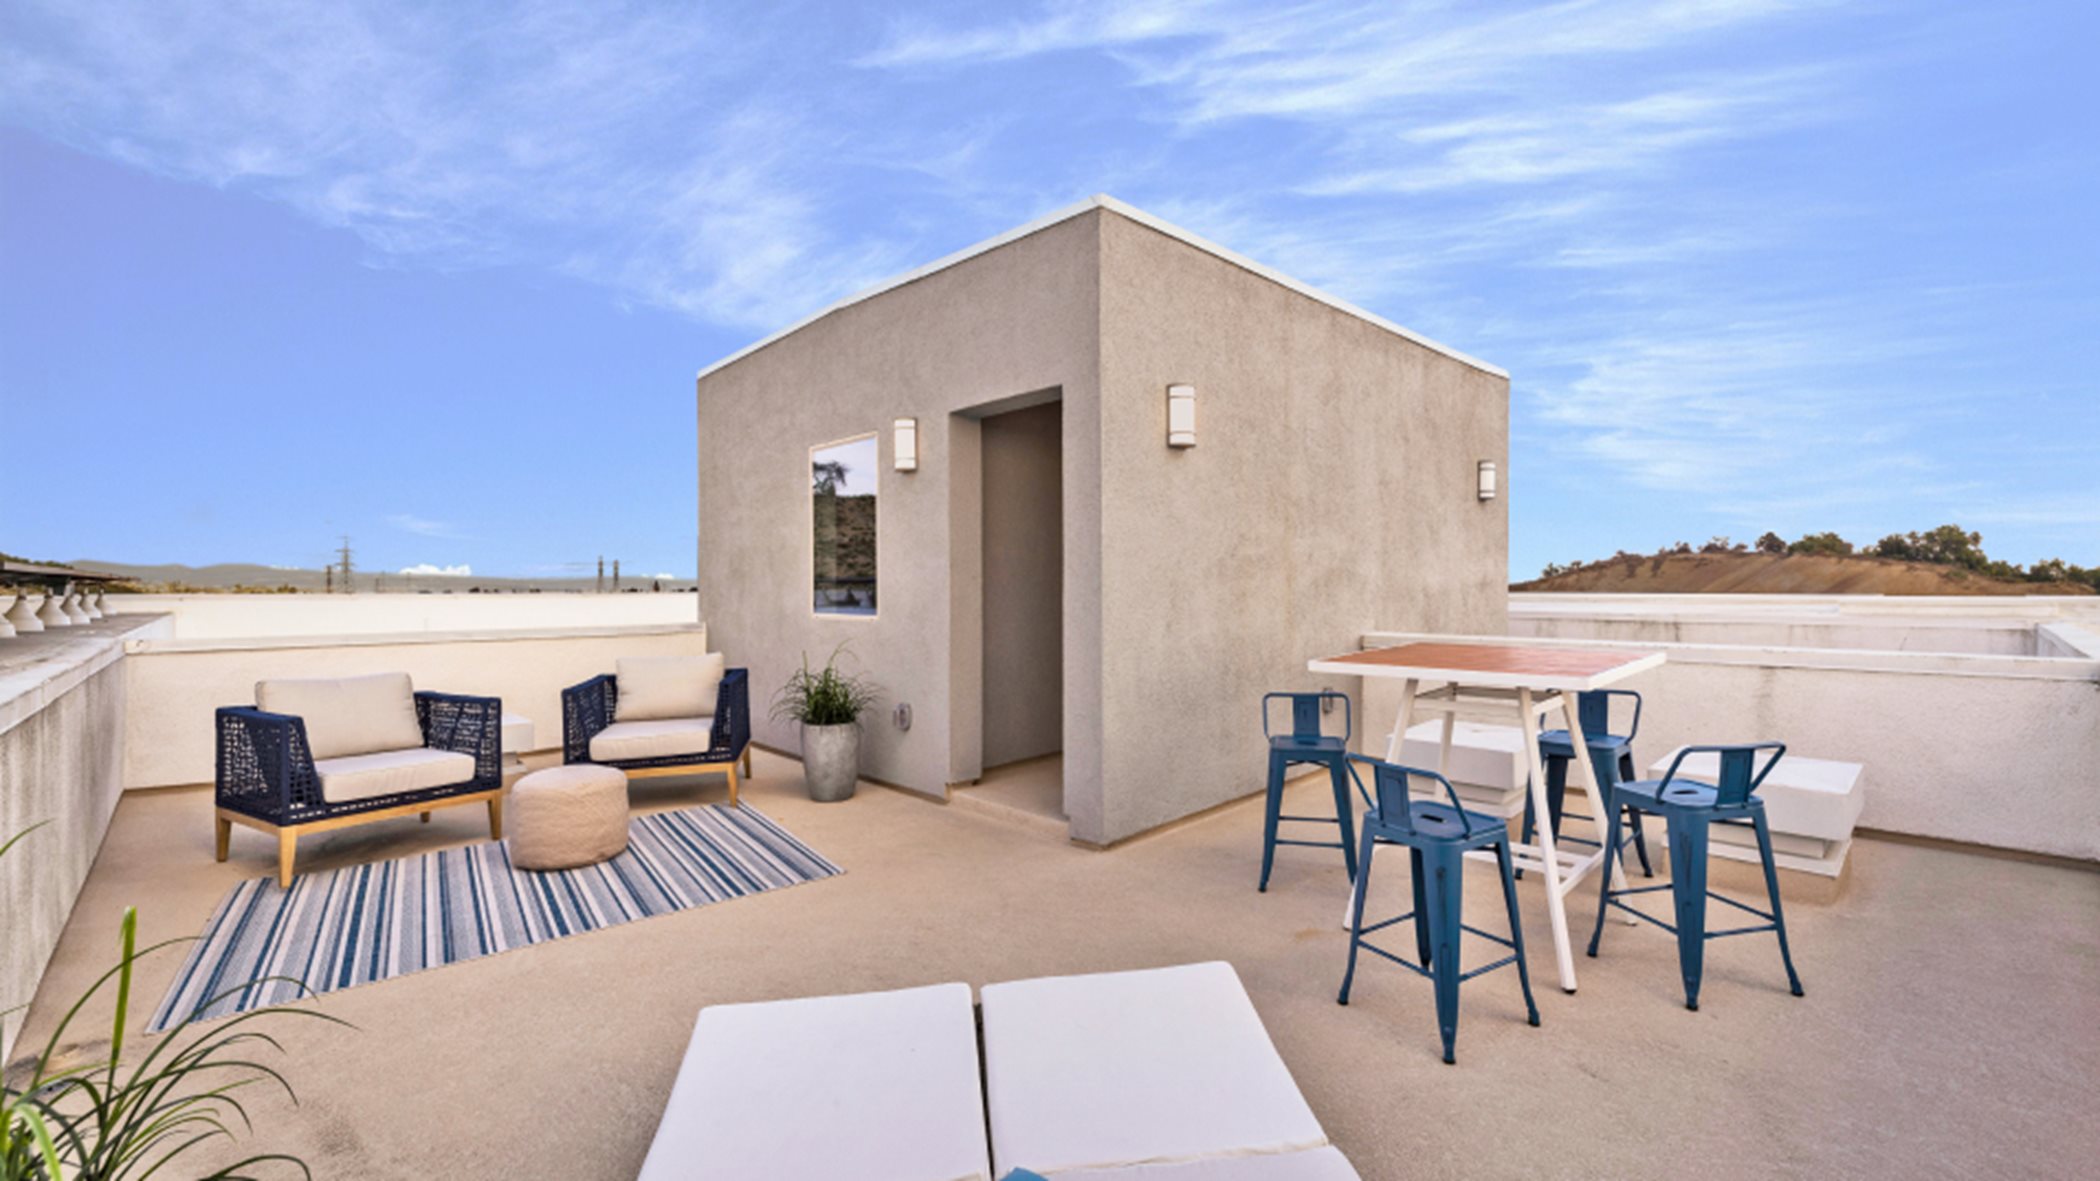 Rooftop deck with patio furniture